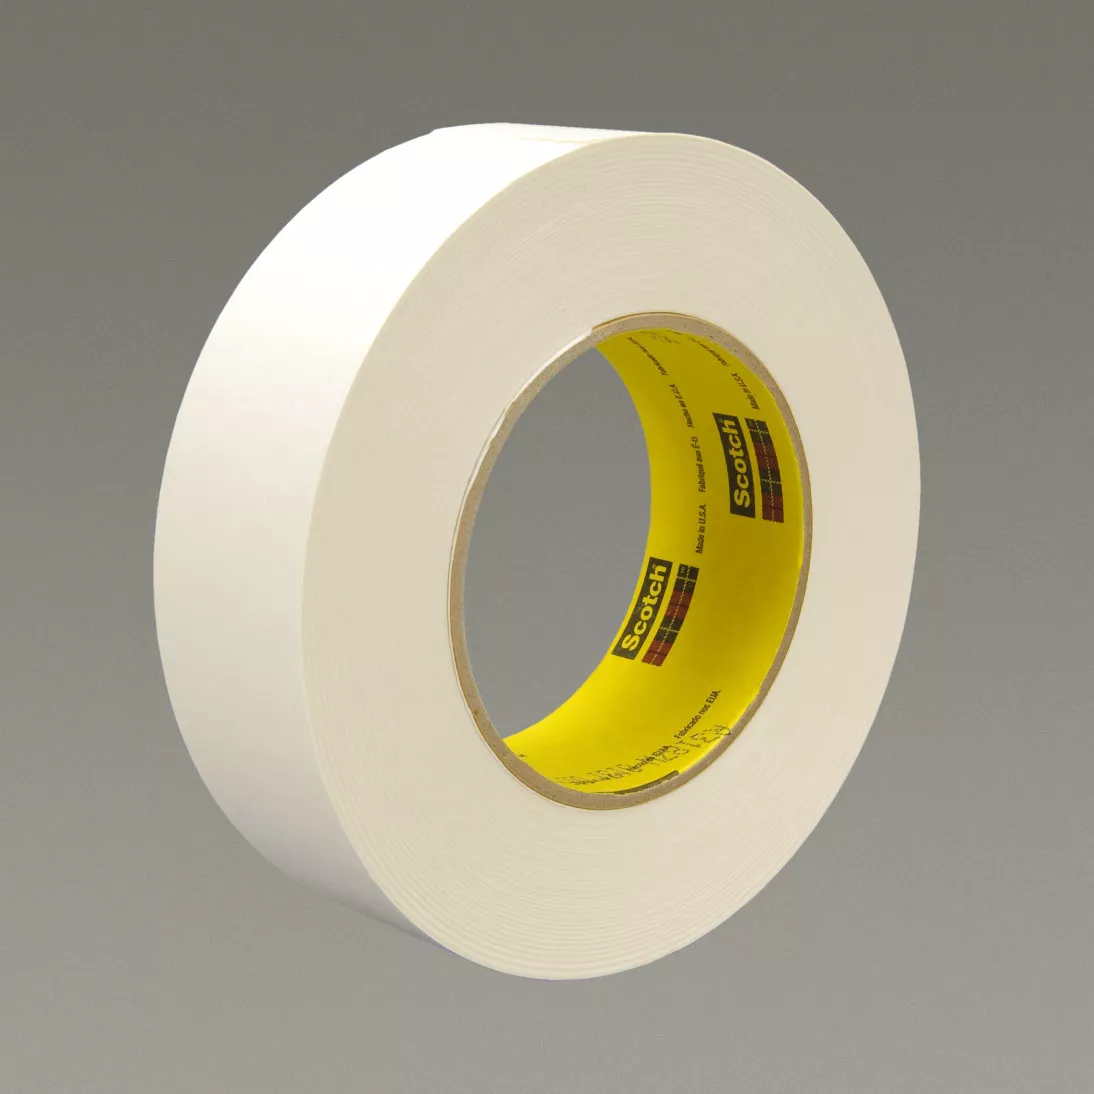 3M™ Repulpable Strong Single Coated Tape R3187, White, 24 mm x 55 m, 7.5
mil, 36 rolls per case